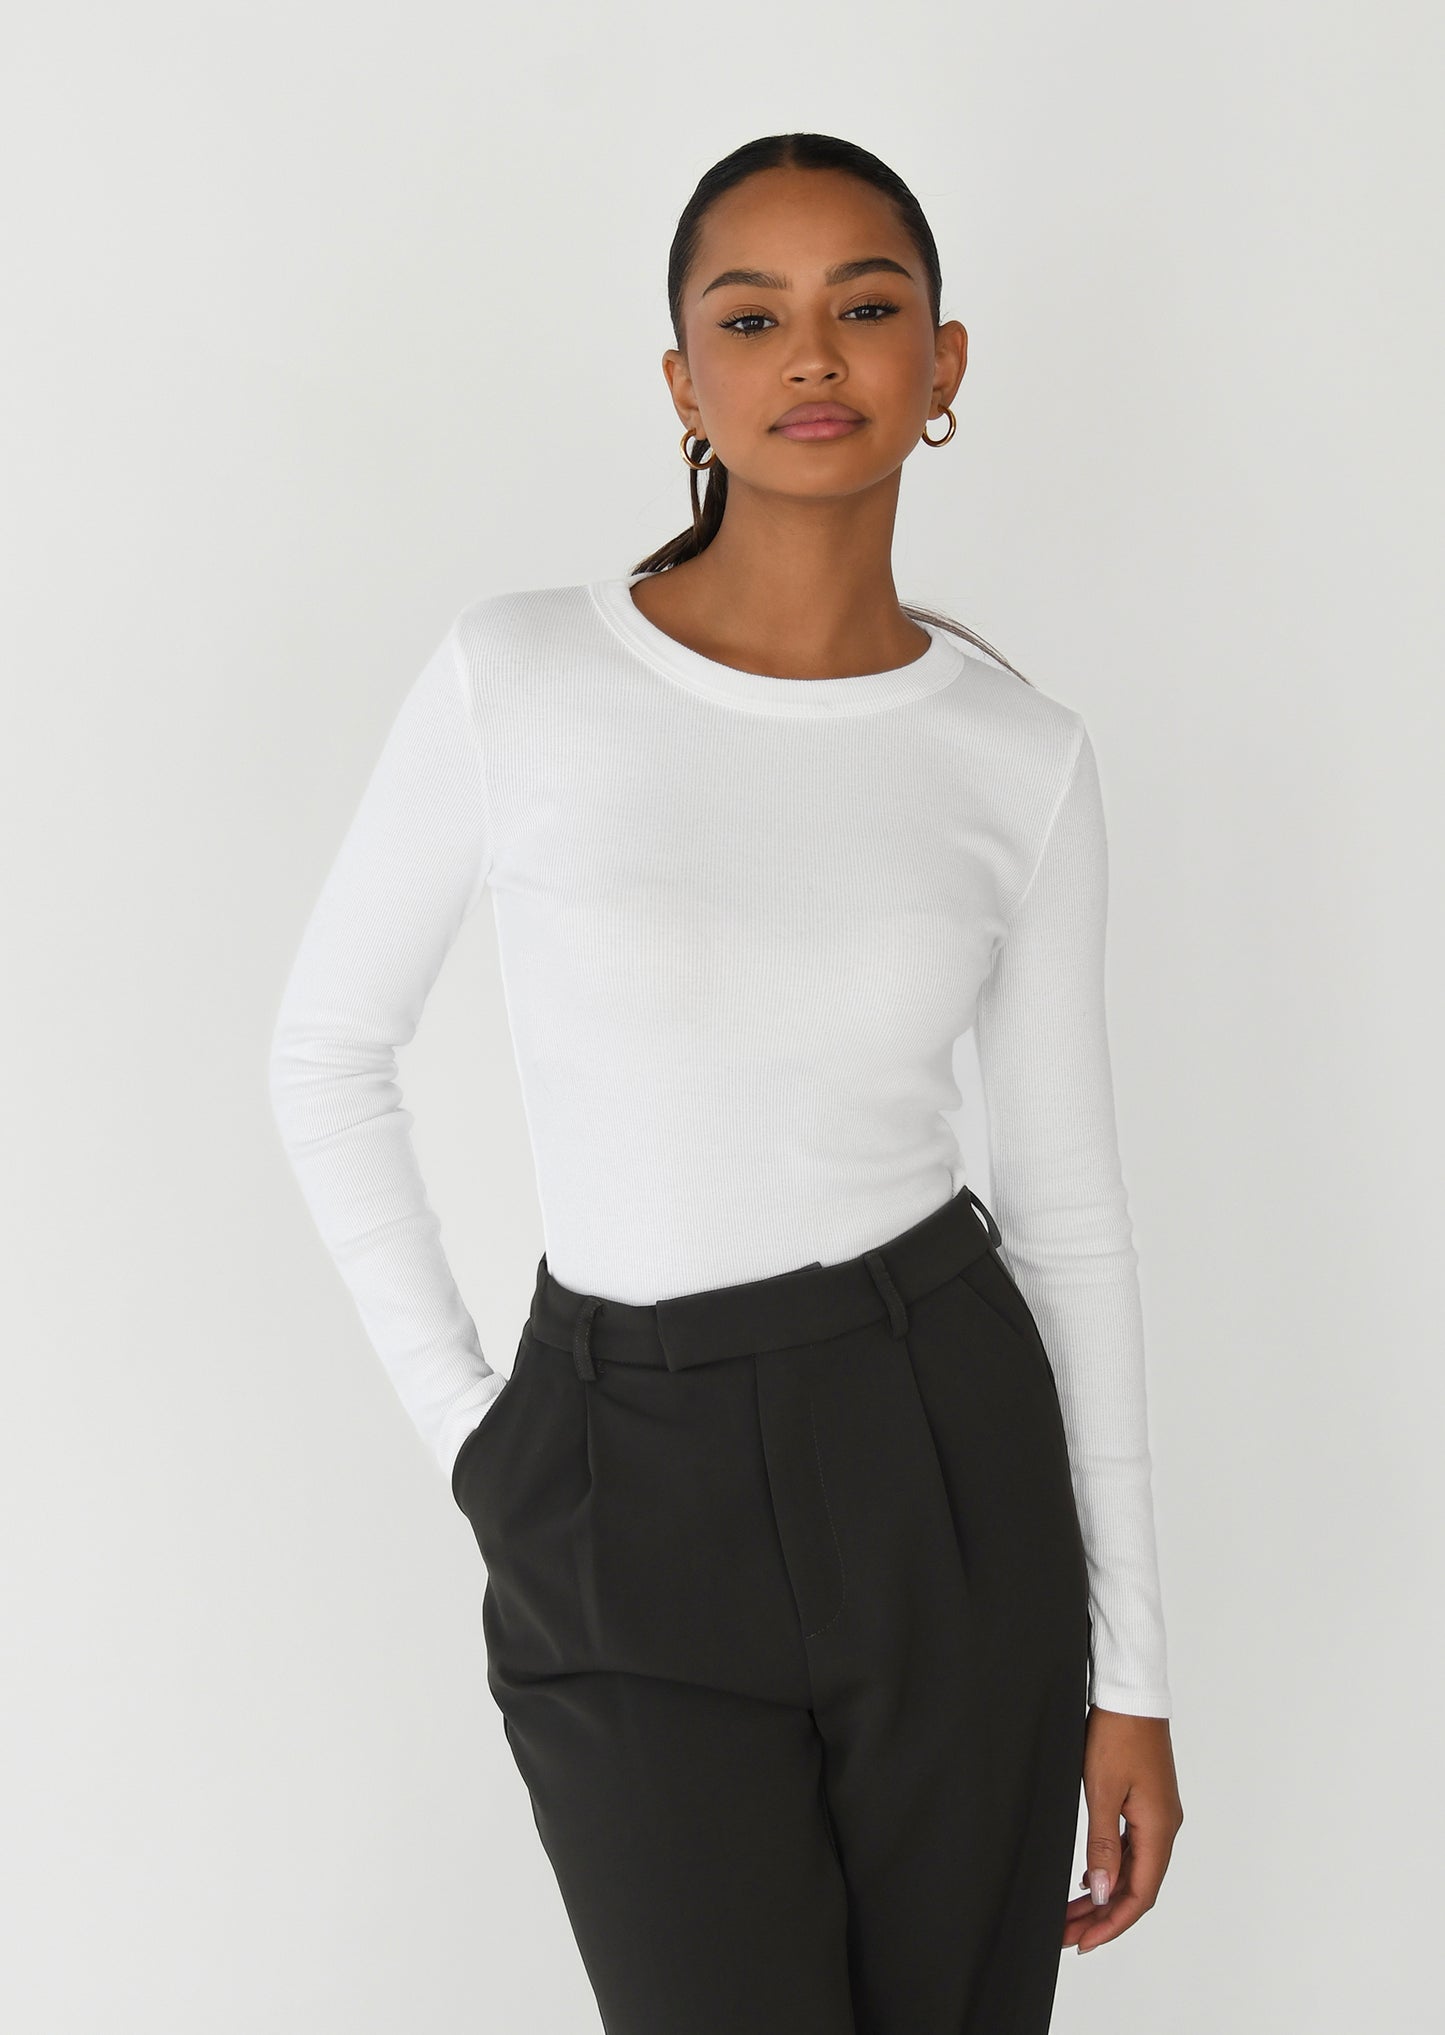 Cotton long-sleeved top